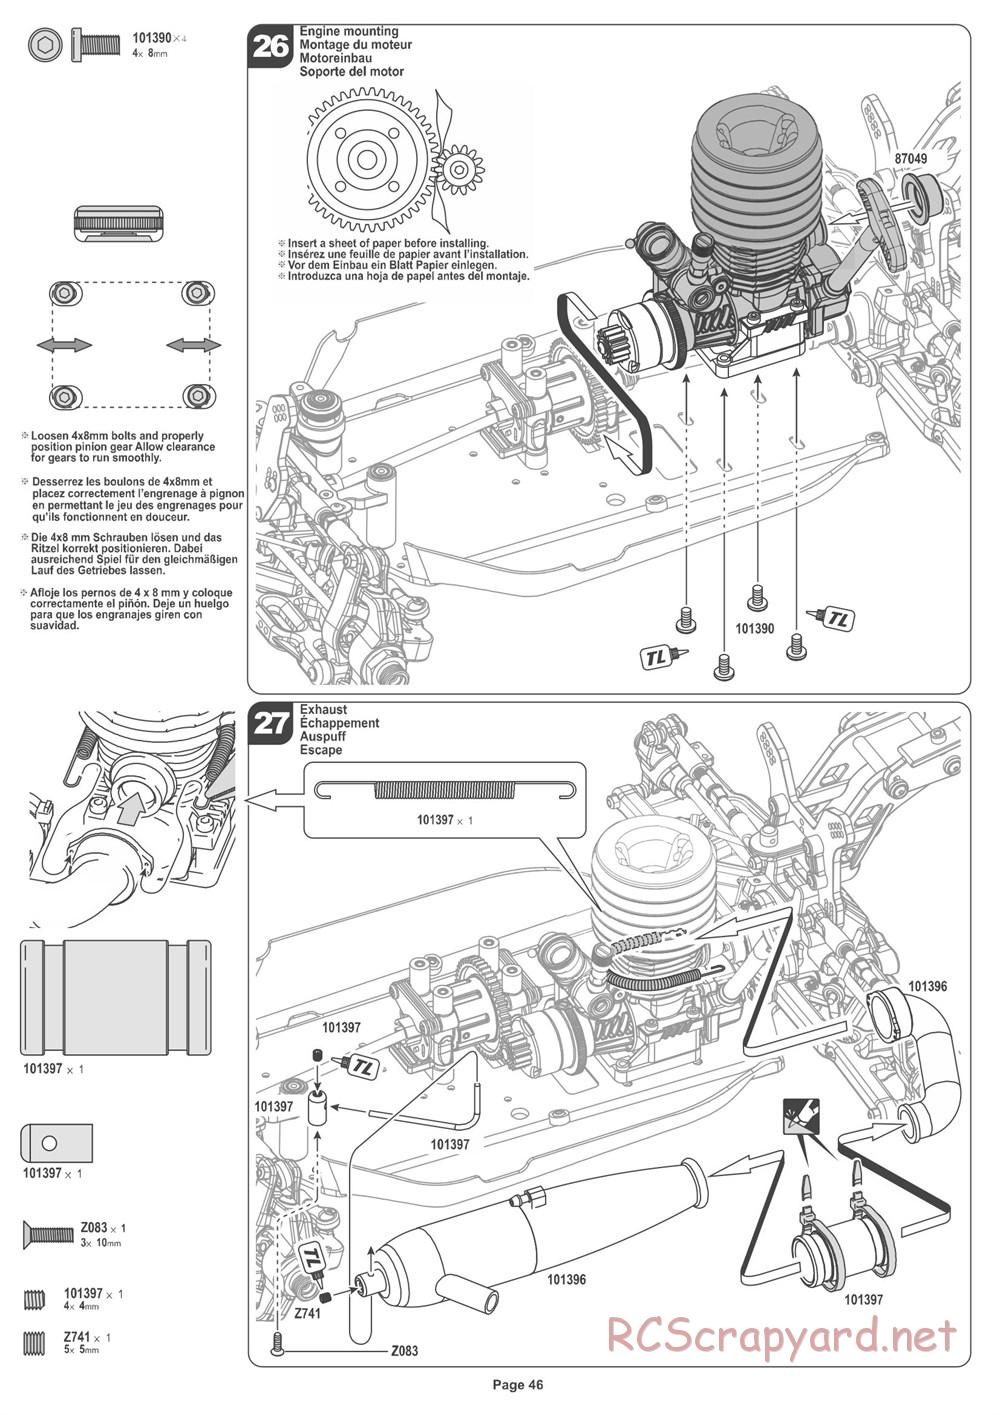 HPI - Pulse 4.6 Buggy - Manual - Page 46